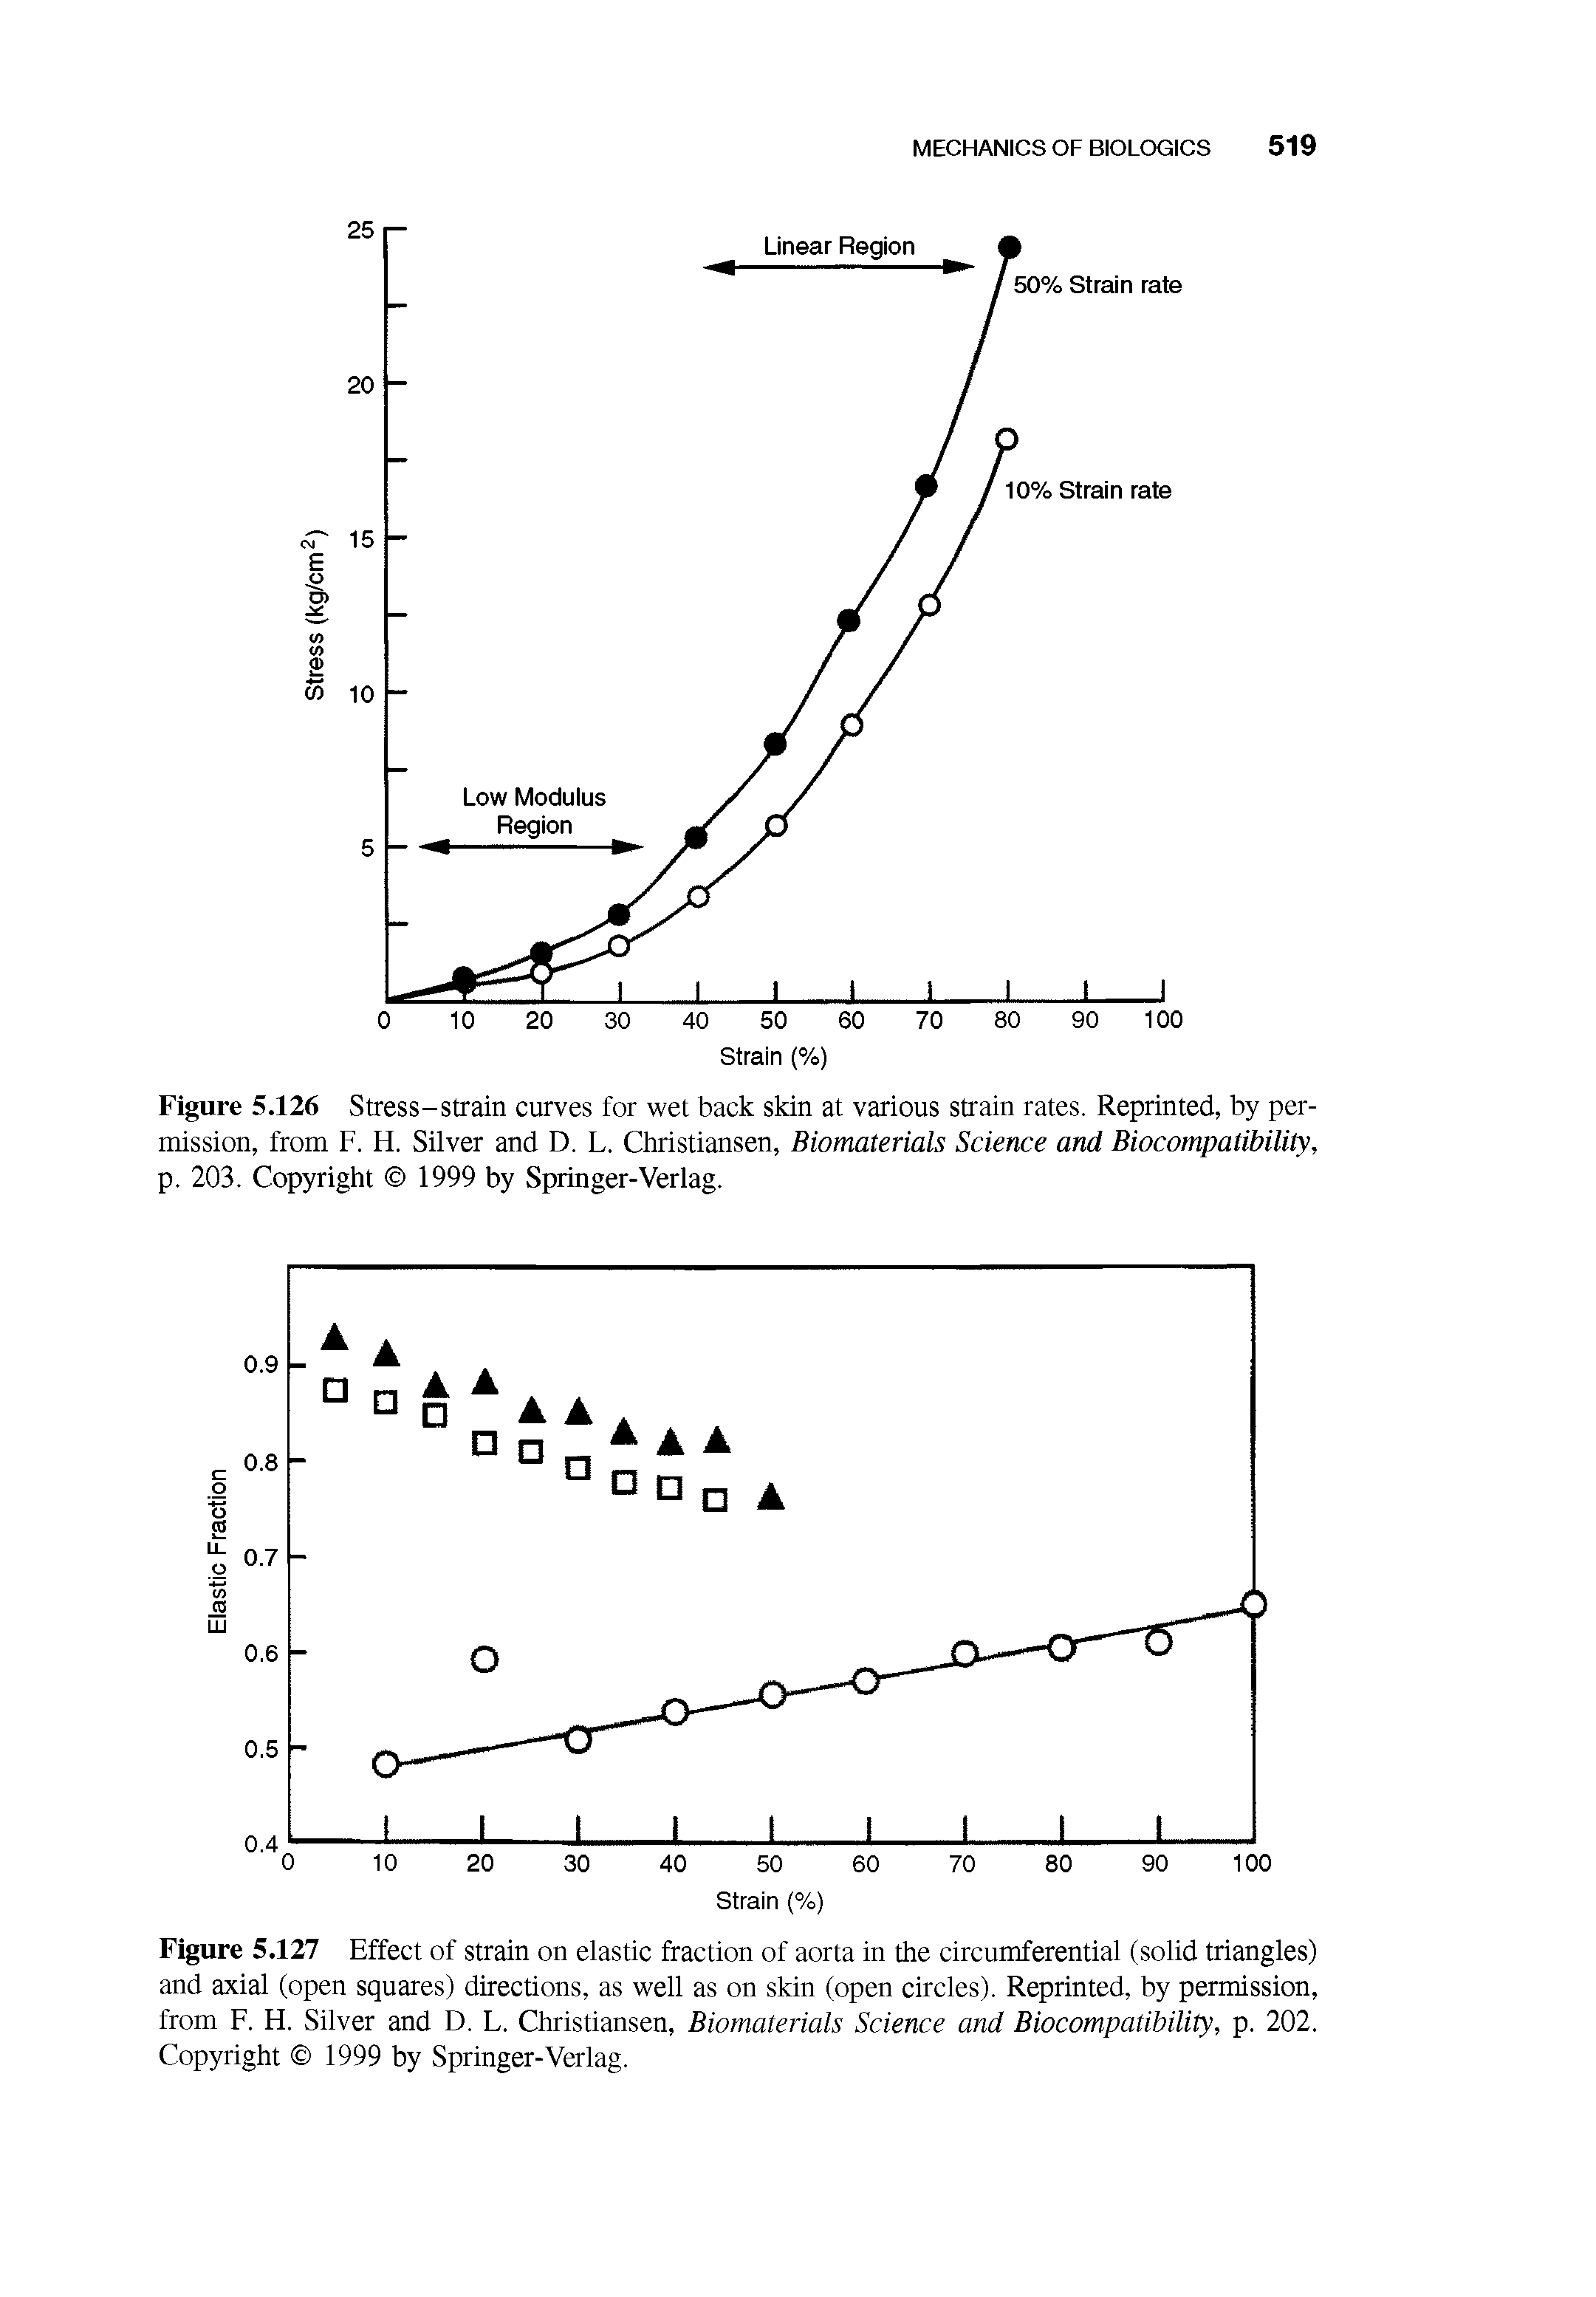 Figure 5.126 Stress-strain curves for wet back skin at various strain rates. Reprinted, by permission, from F. H. Silver and D. L. Christiansen, Biomaterials Science and Biocompatibility, p. 203. Copyright 1999 by Springer-Verlag.